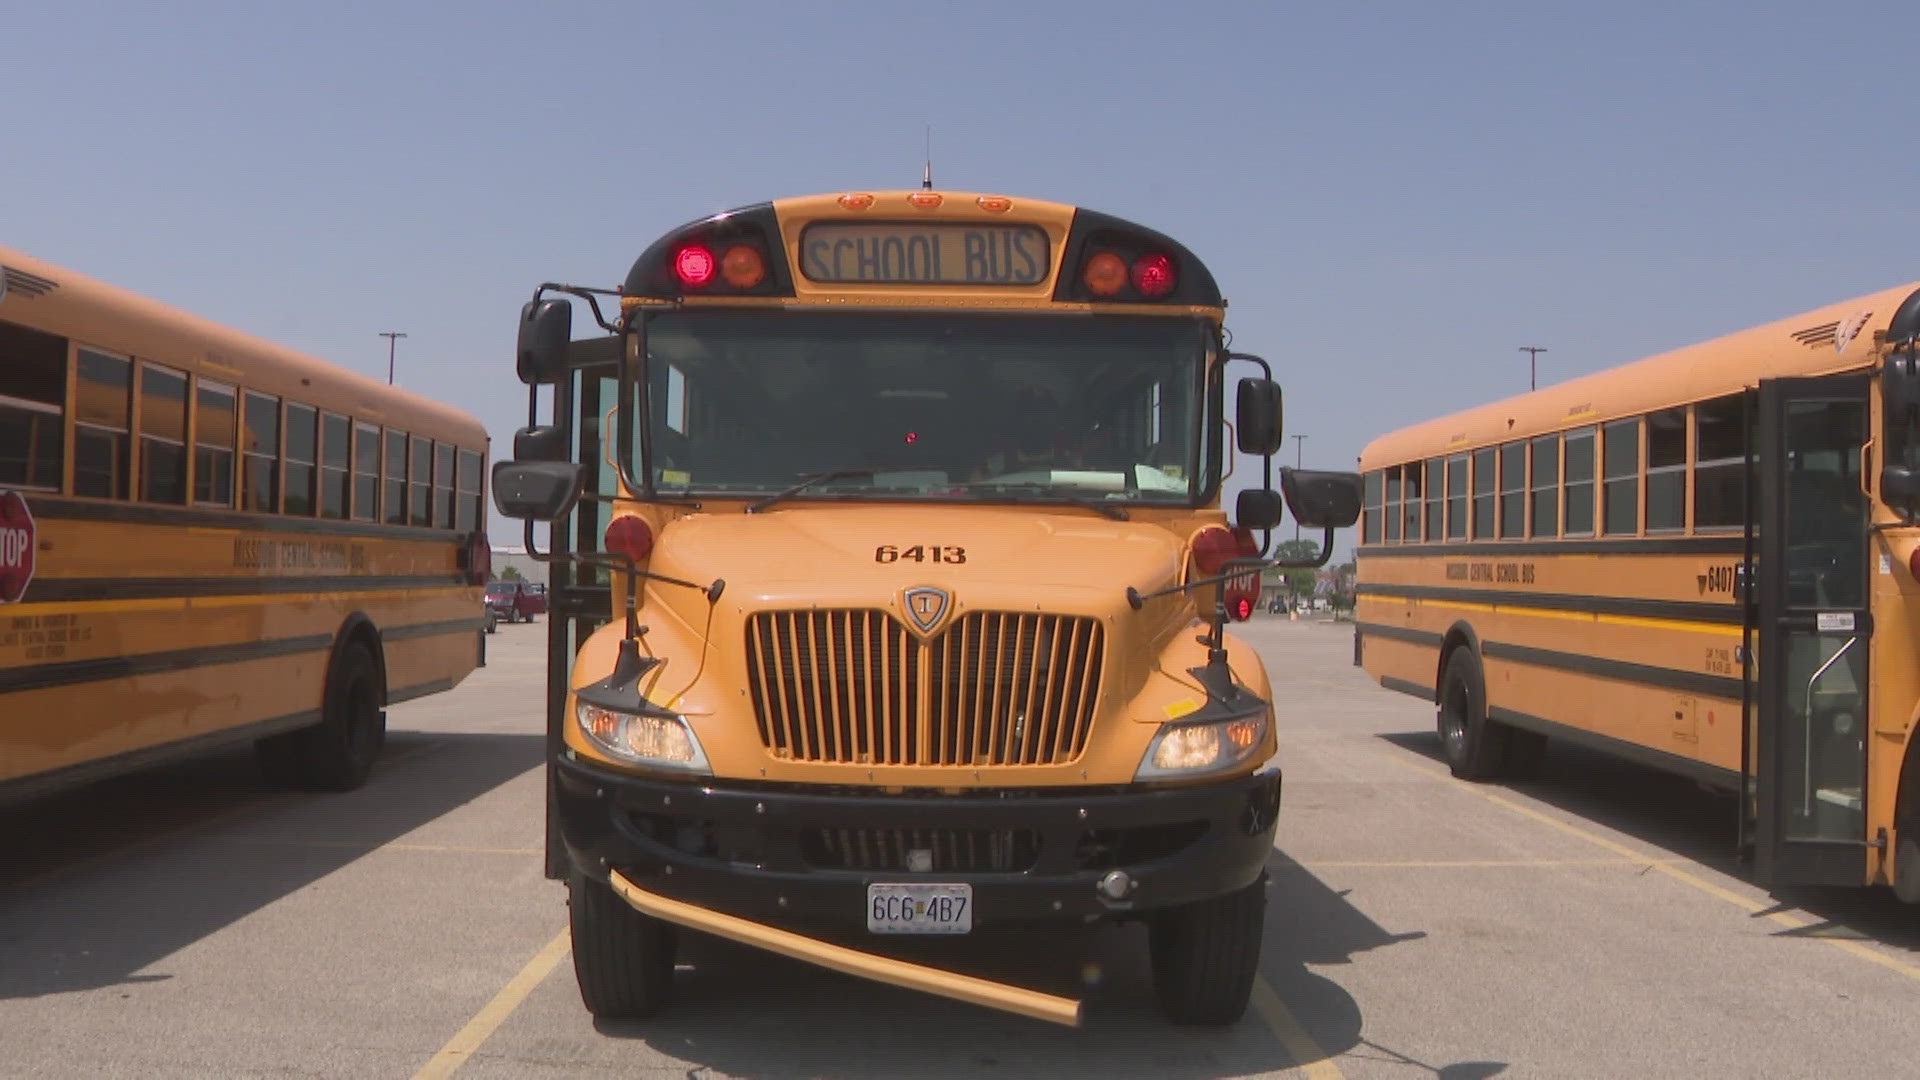 School bus company pulling out all the stops to attract new hires. The push comes ahead of the upcoming school year in need of more school bus drivers.